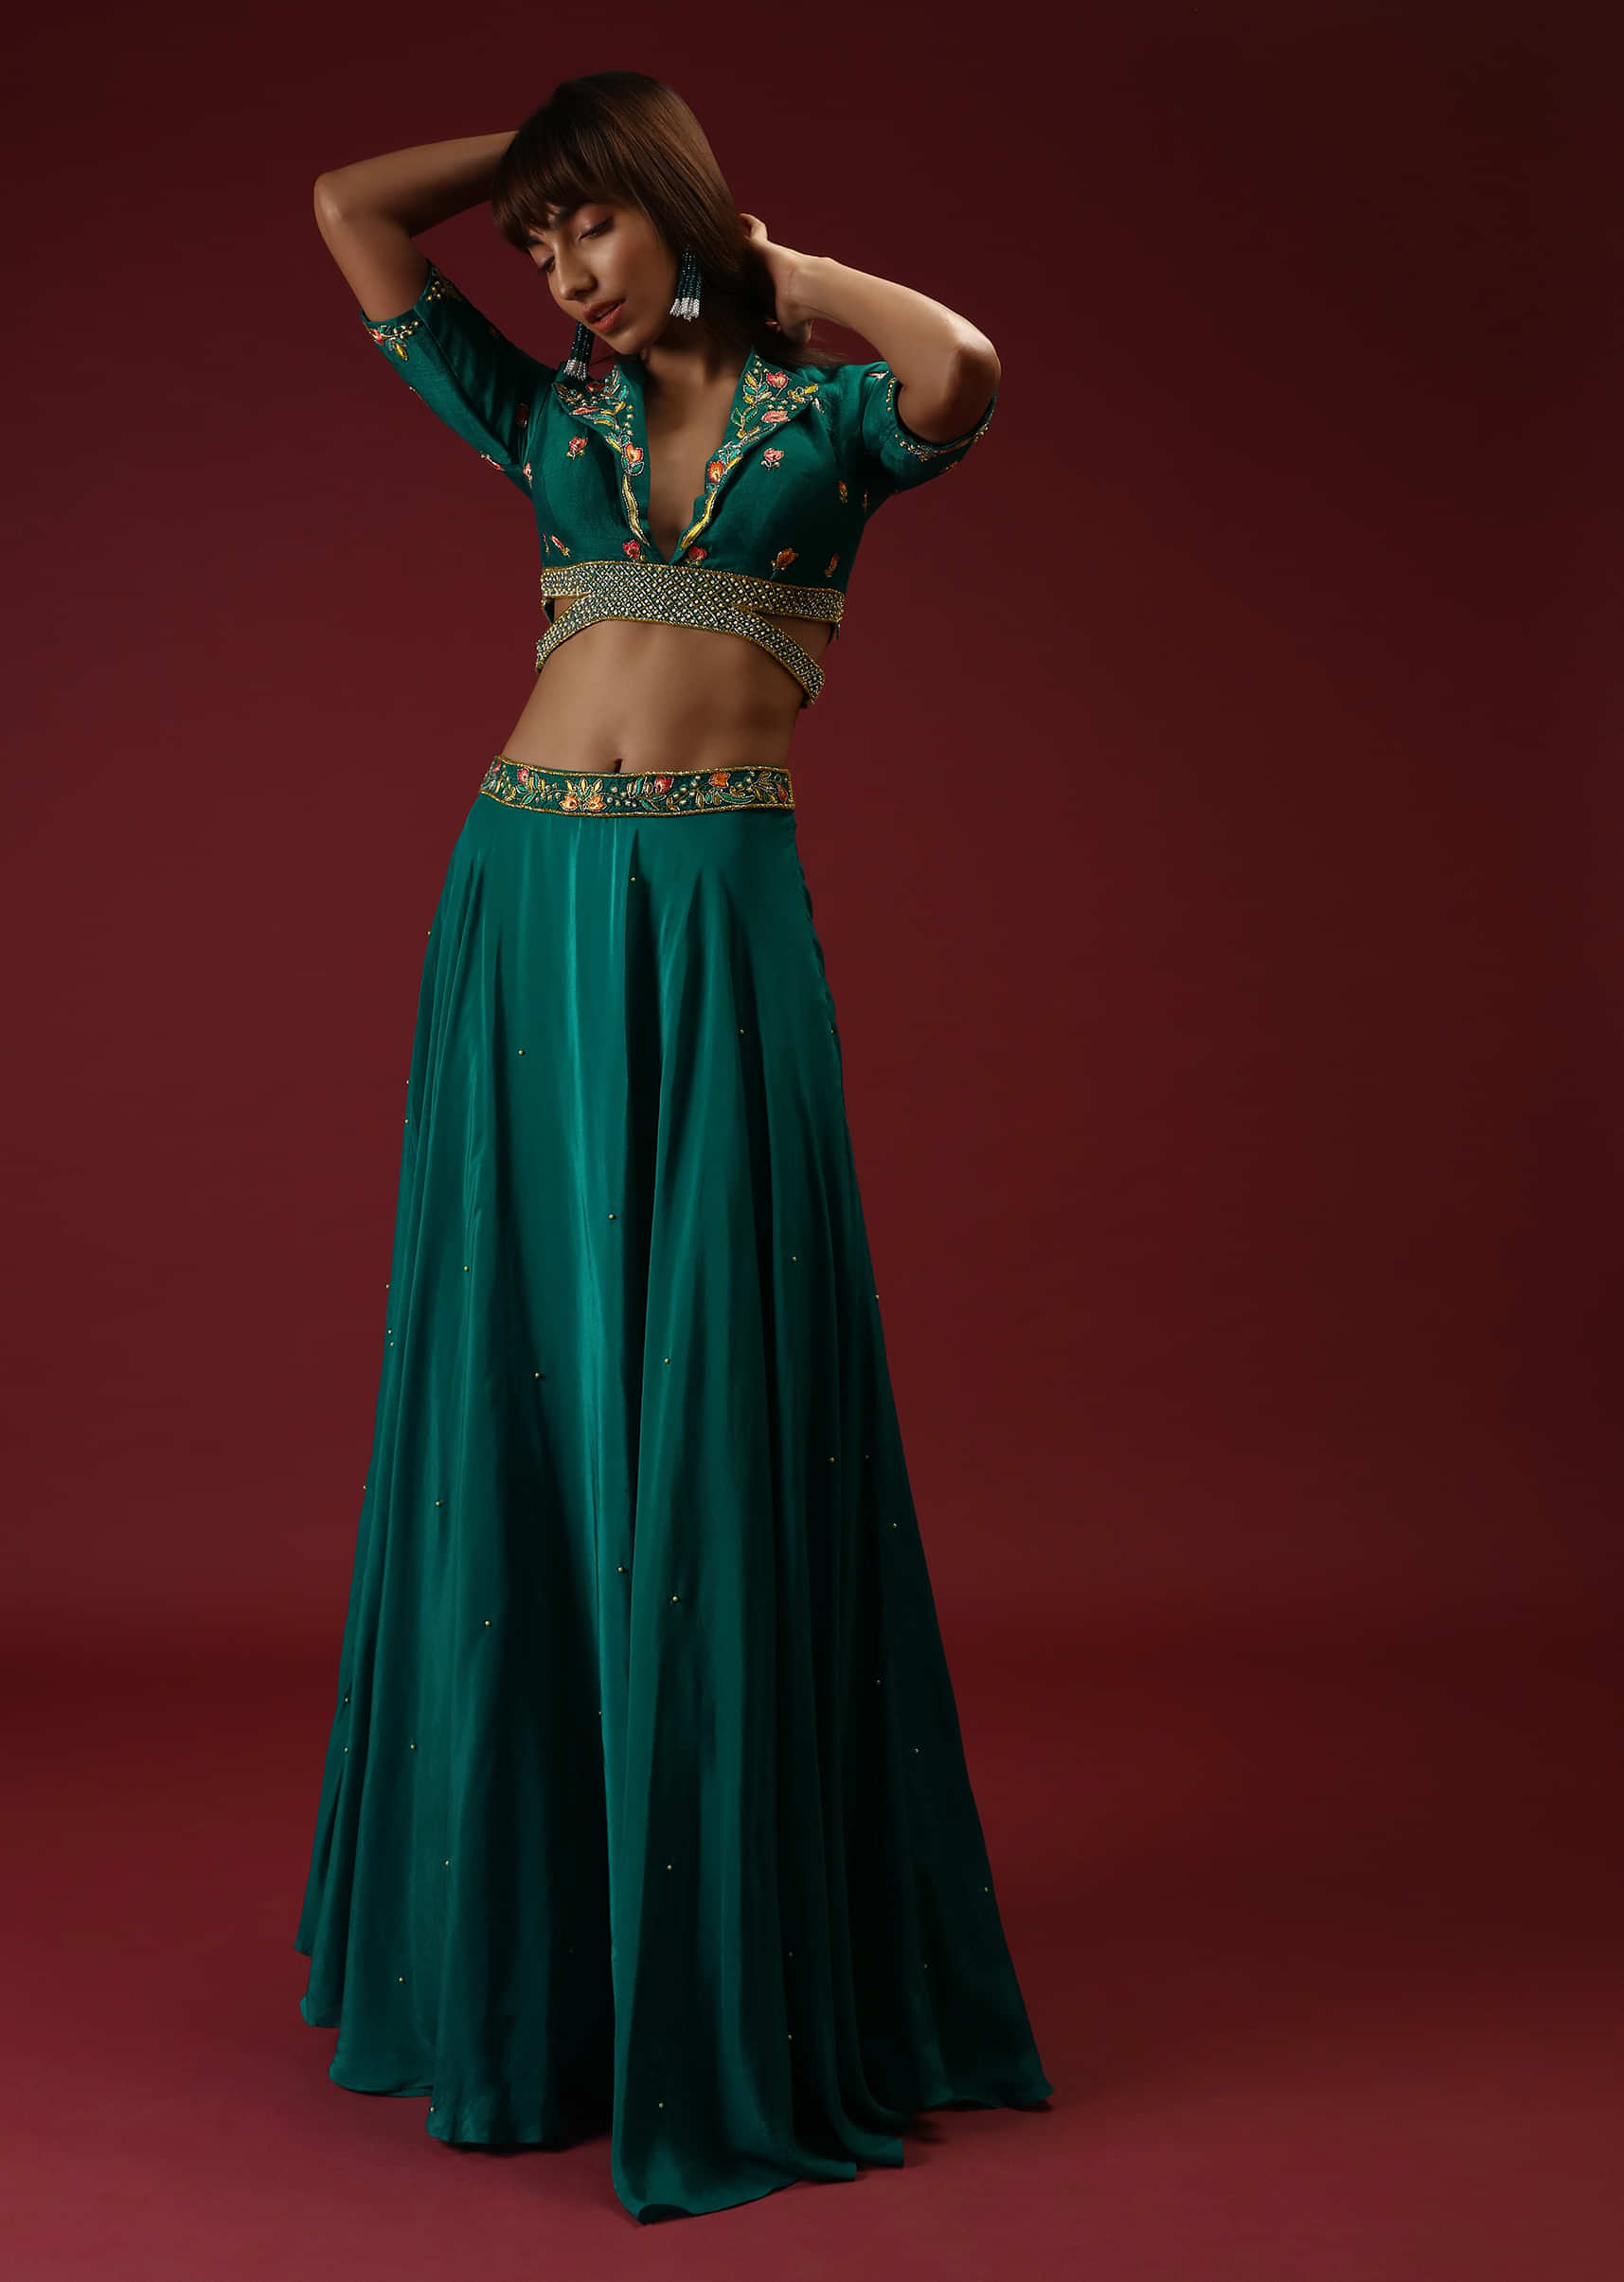 Teal Skirt And Crop Top With Lapel Collar Neckline And Side Cut Out Detailing Featuring Multi Colored Handwork 